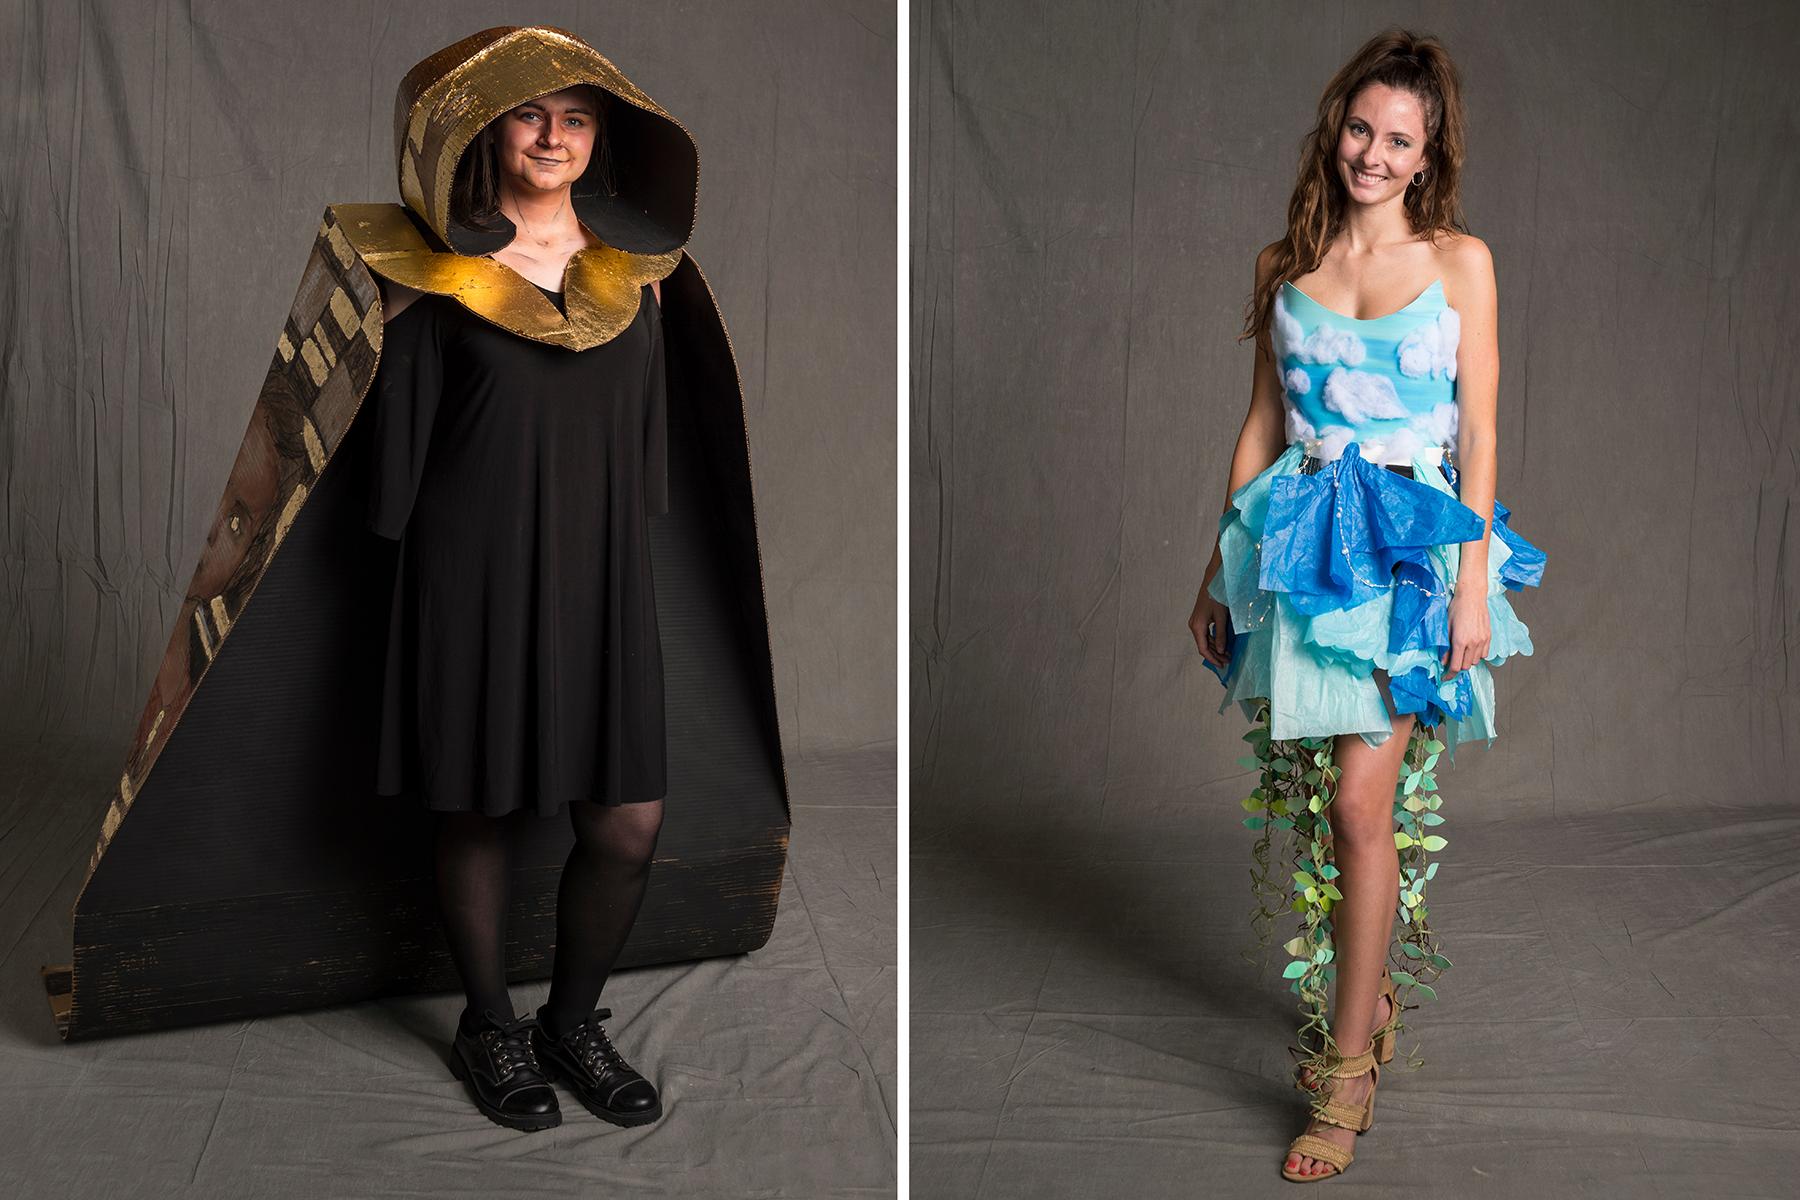 Students don self-designed wearable sculpture.